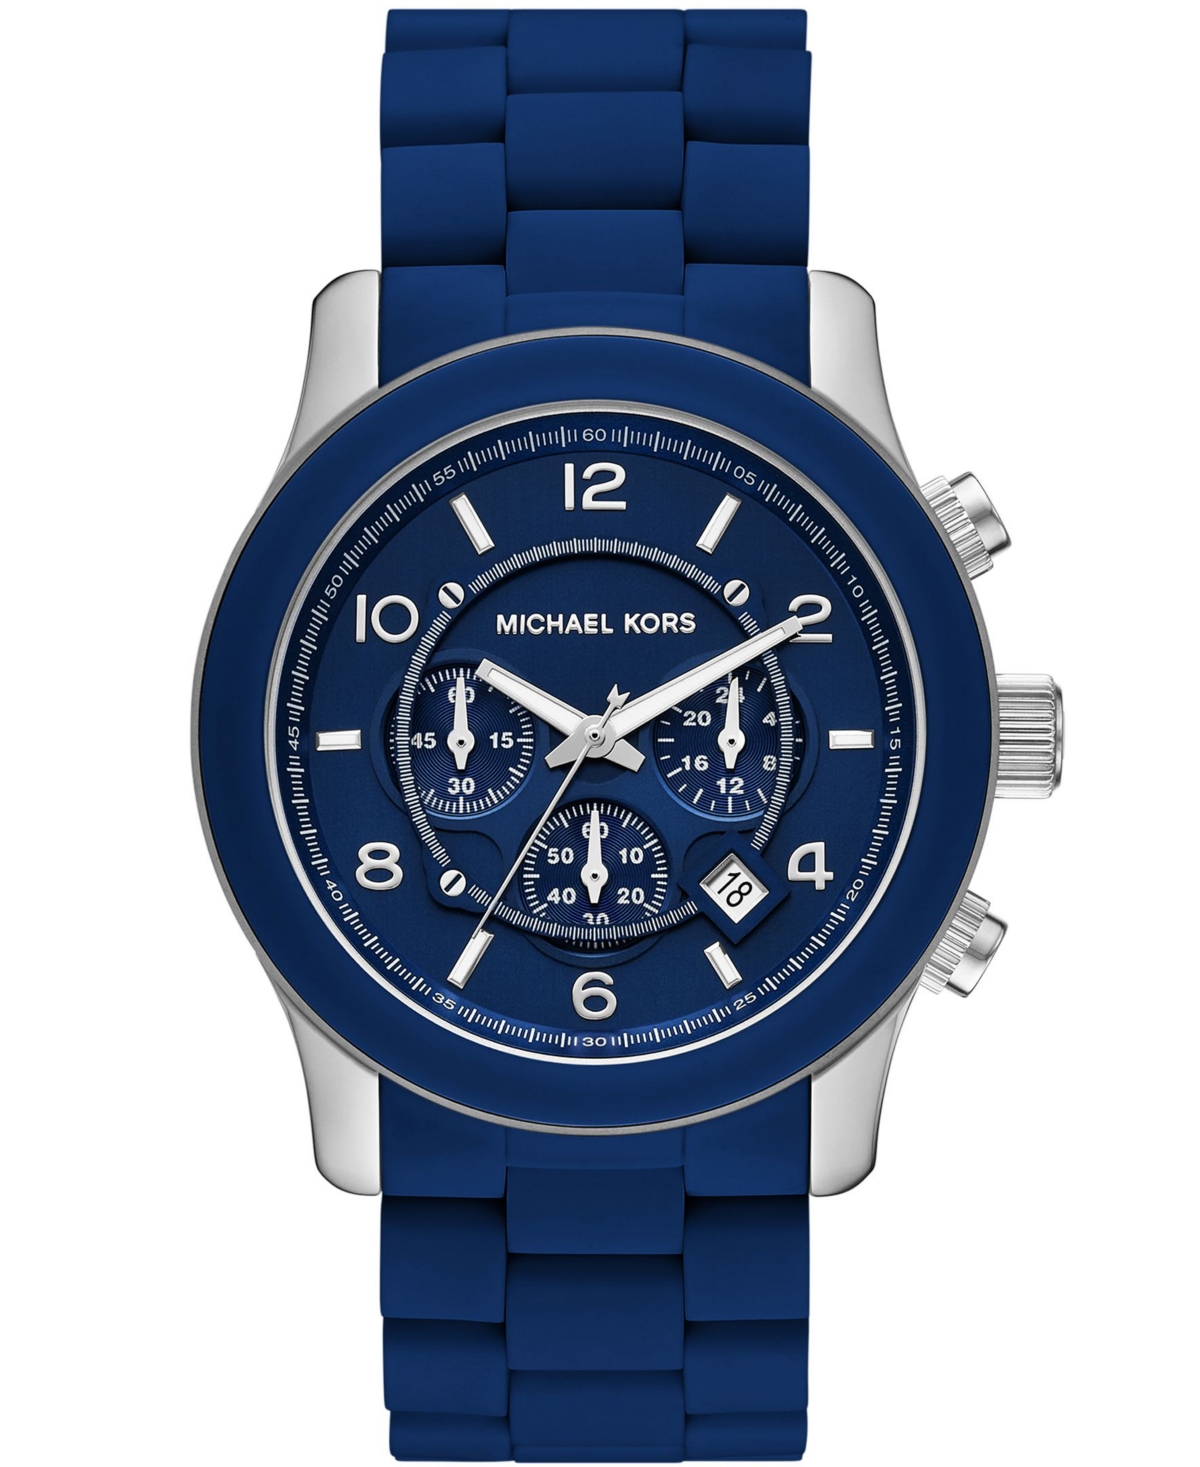 MICHAEL KORS UNISEX RUNWAY CHRONOGRAPH NAVY SILICONE-WRAPPED STAINLESS STEEL WATCH 45MM